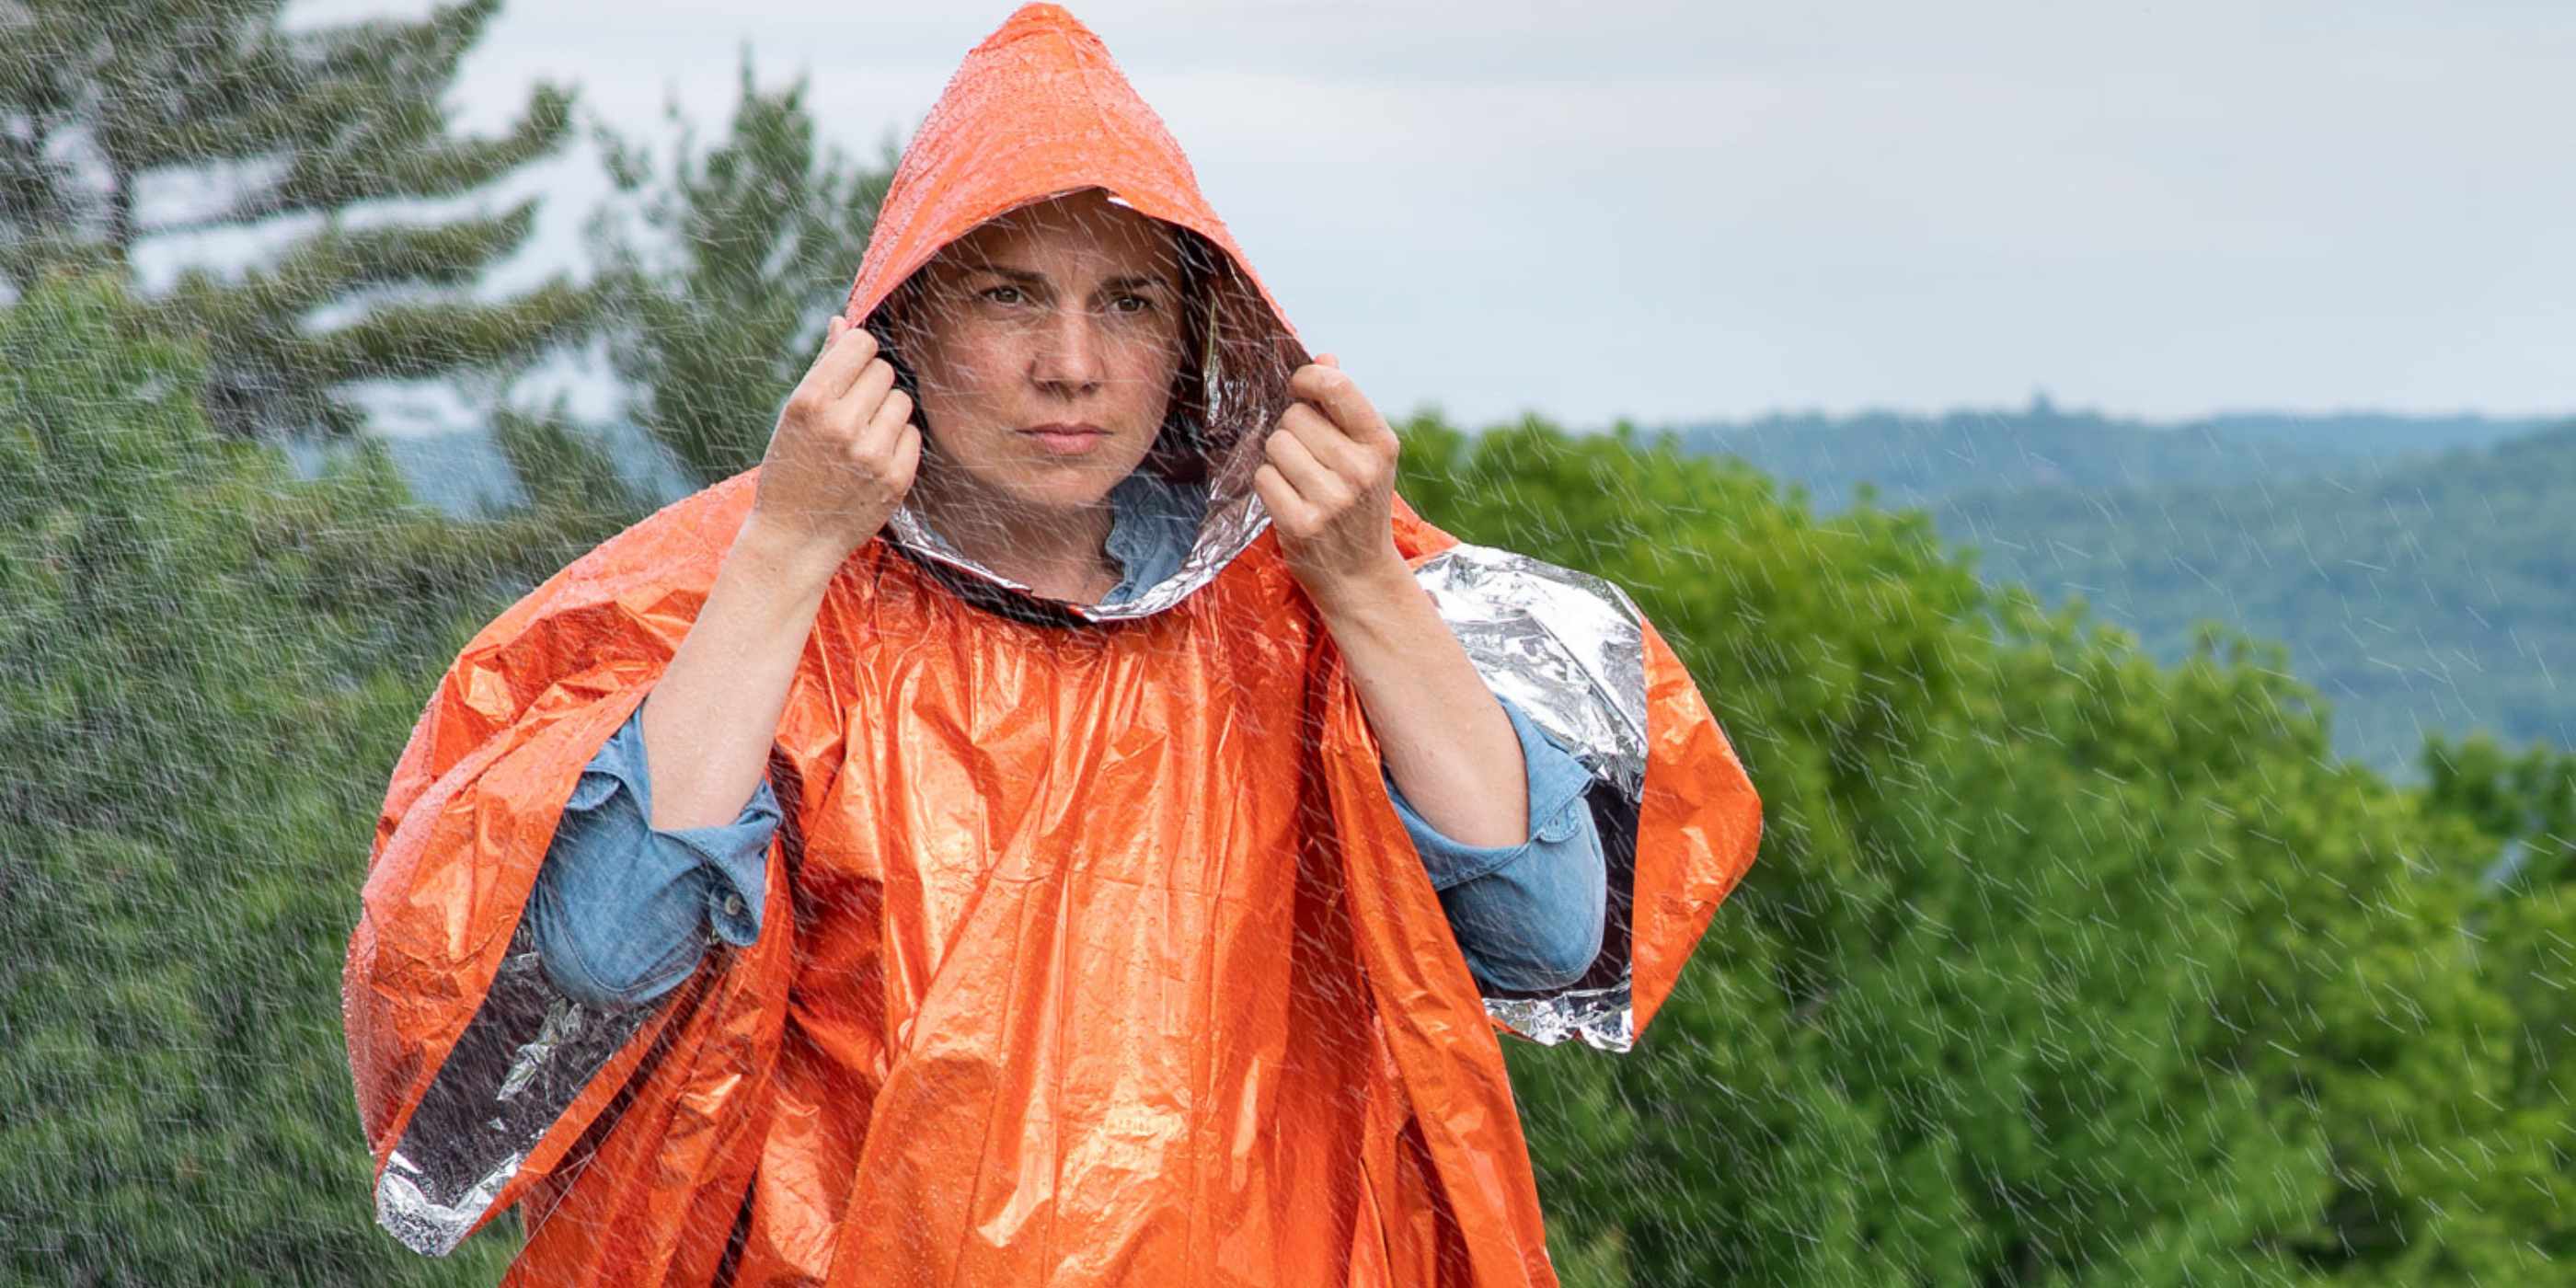 Woman in Orange SOL Heat Reflective Poncho in the Rain Against Mountain Background